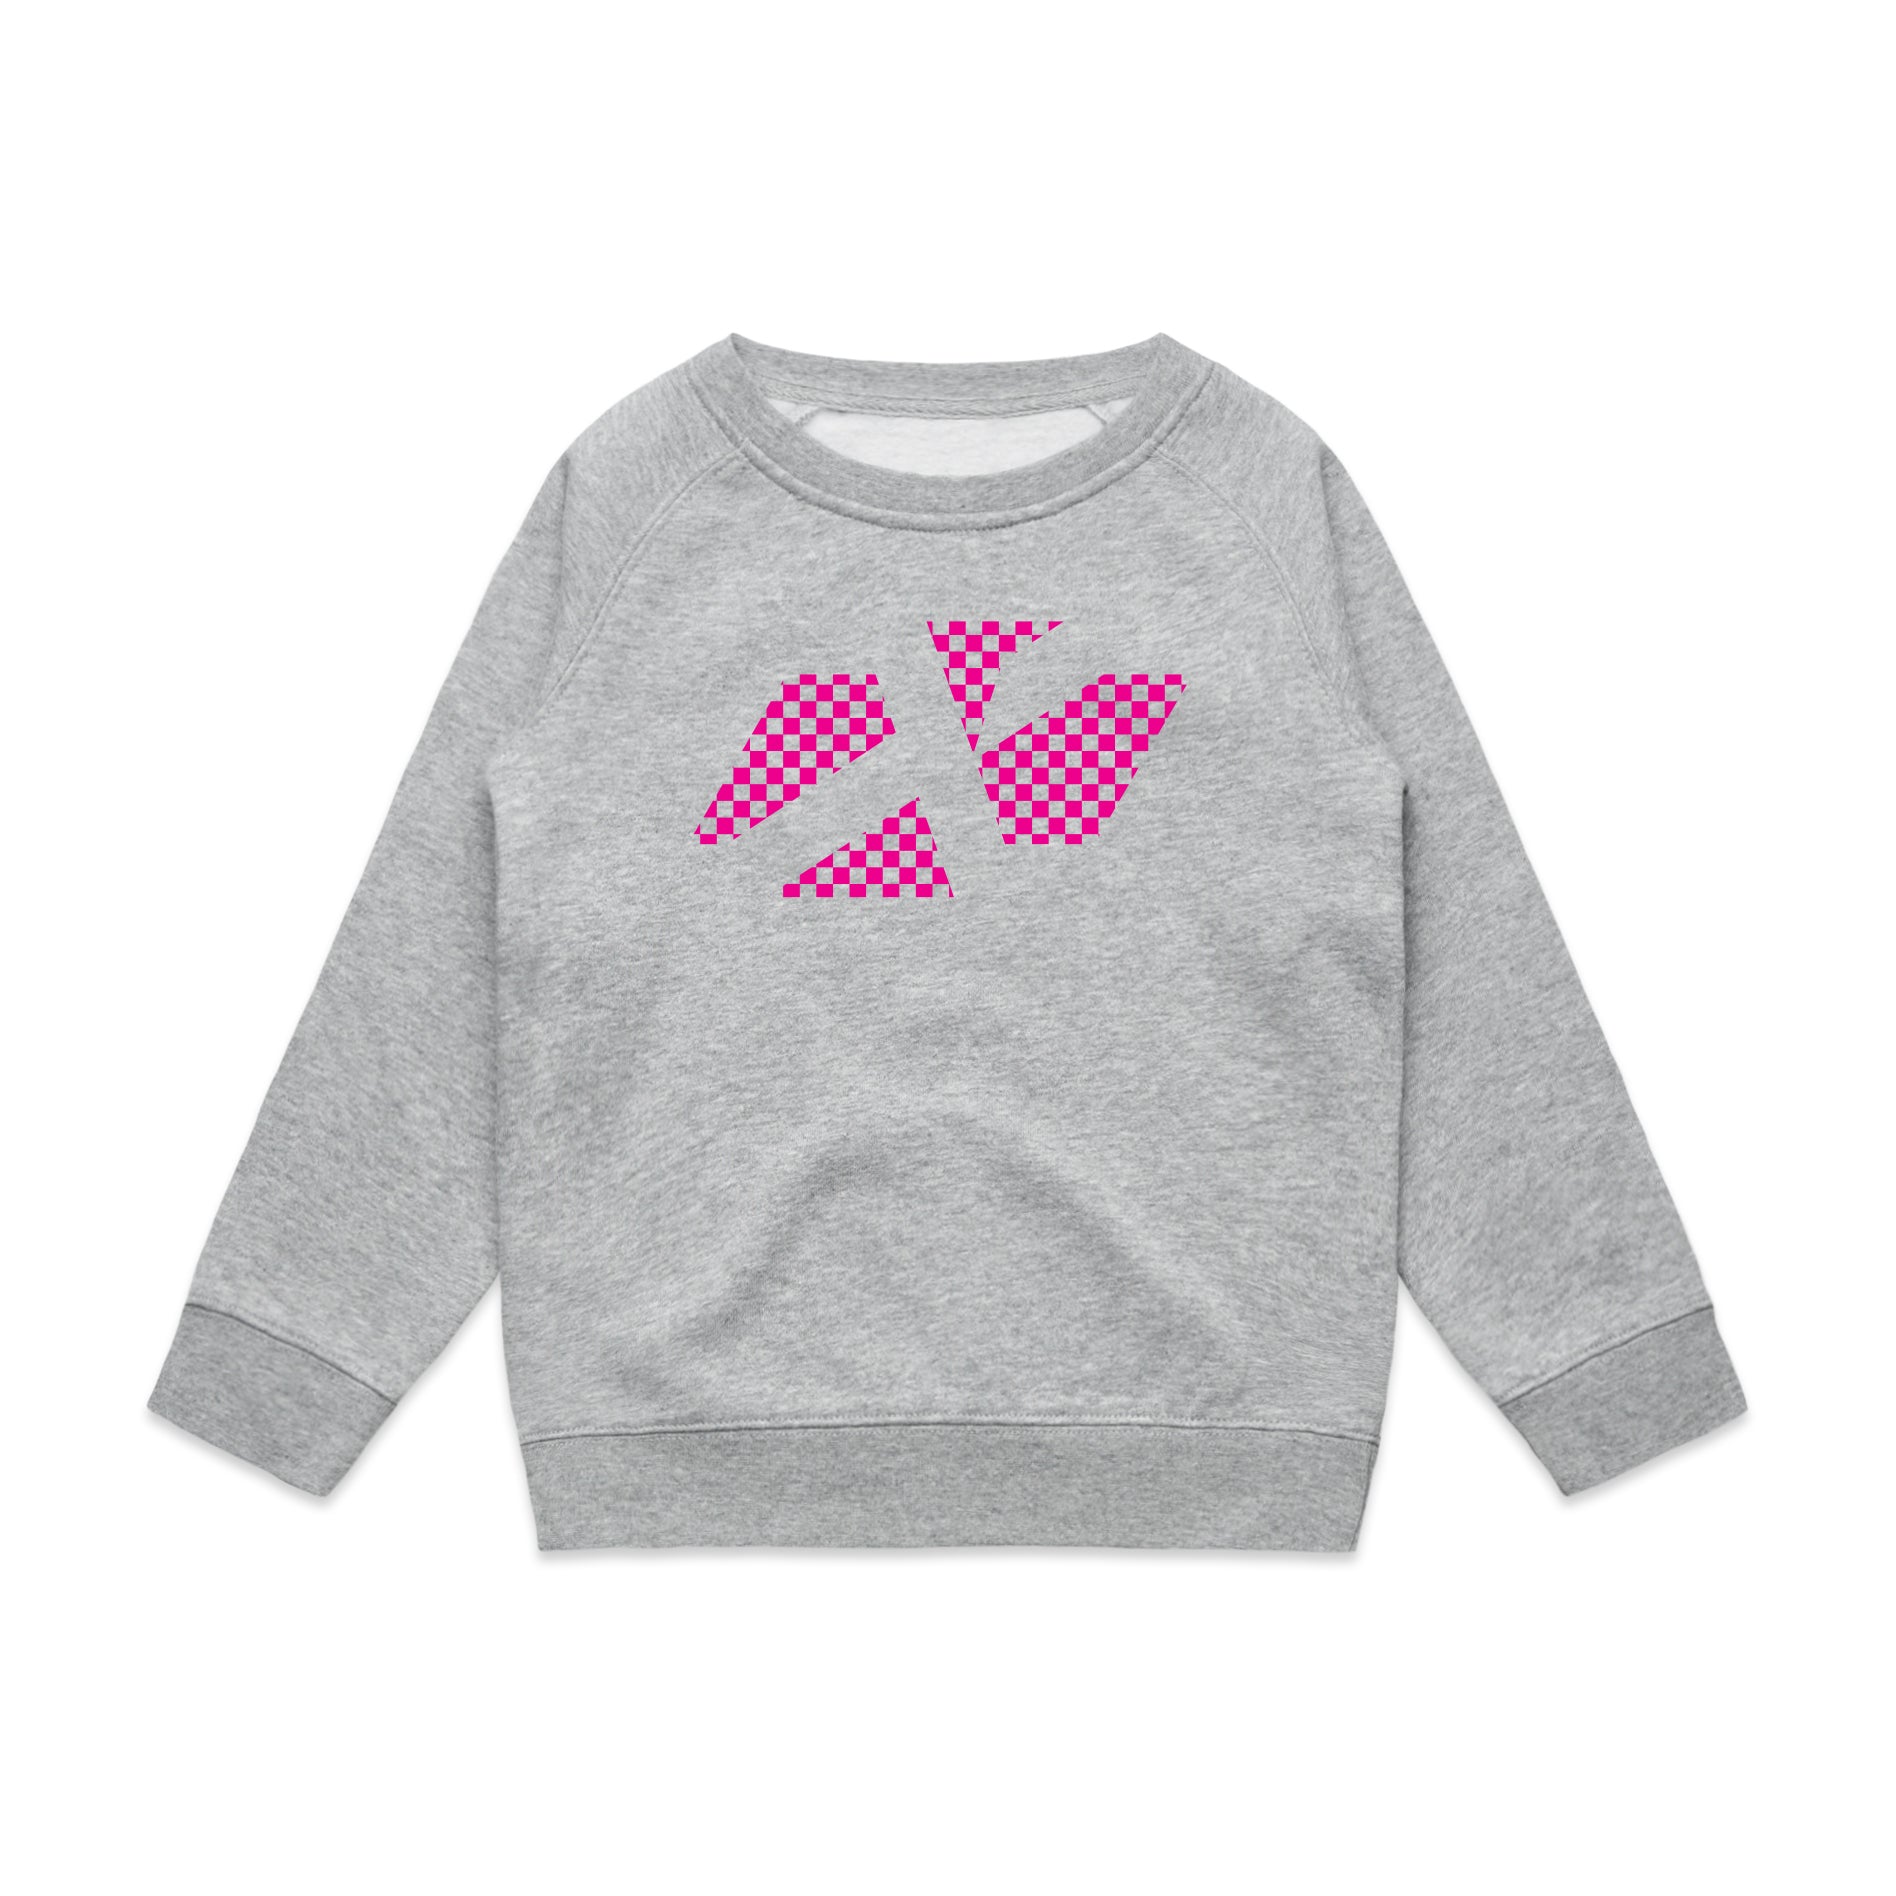 YOUTH CROSS ICON PINK CHEQUERED CREW